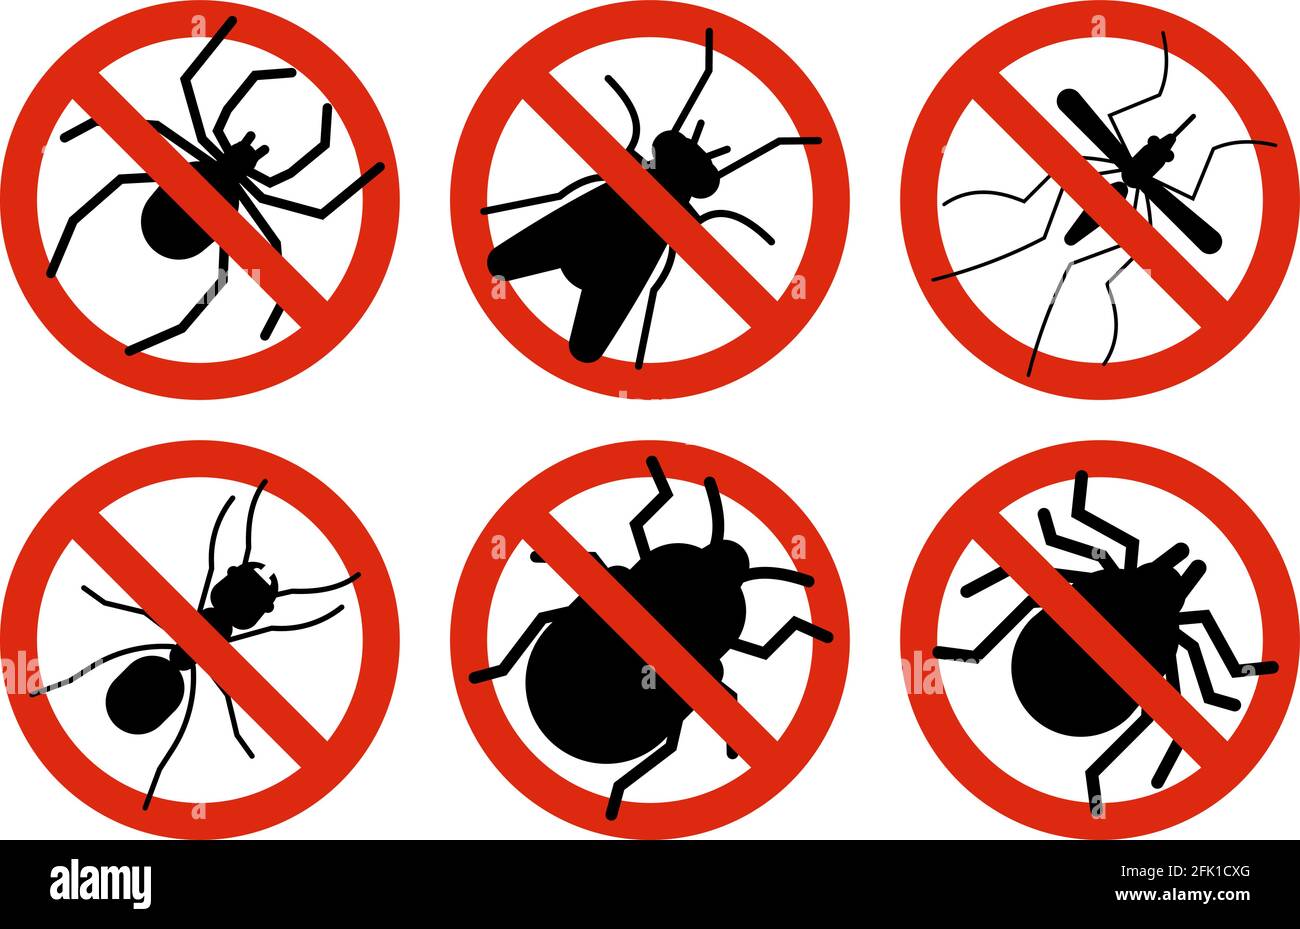 Stop insects. Tick, bugs and mosquito silhouettes. Warning prohibited sign, anti insect vector icons Stock Vector